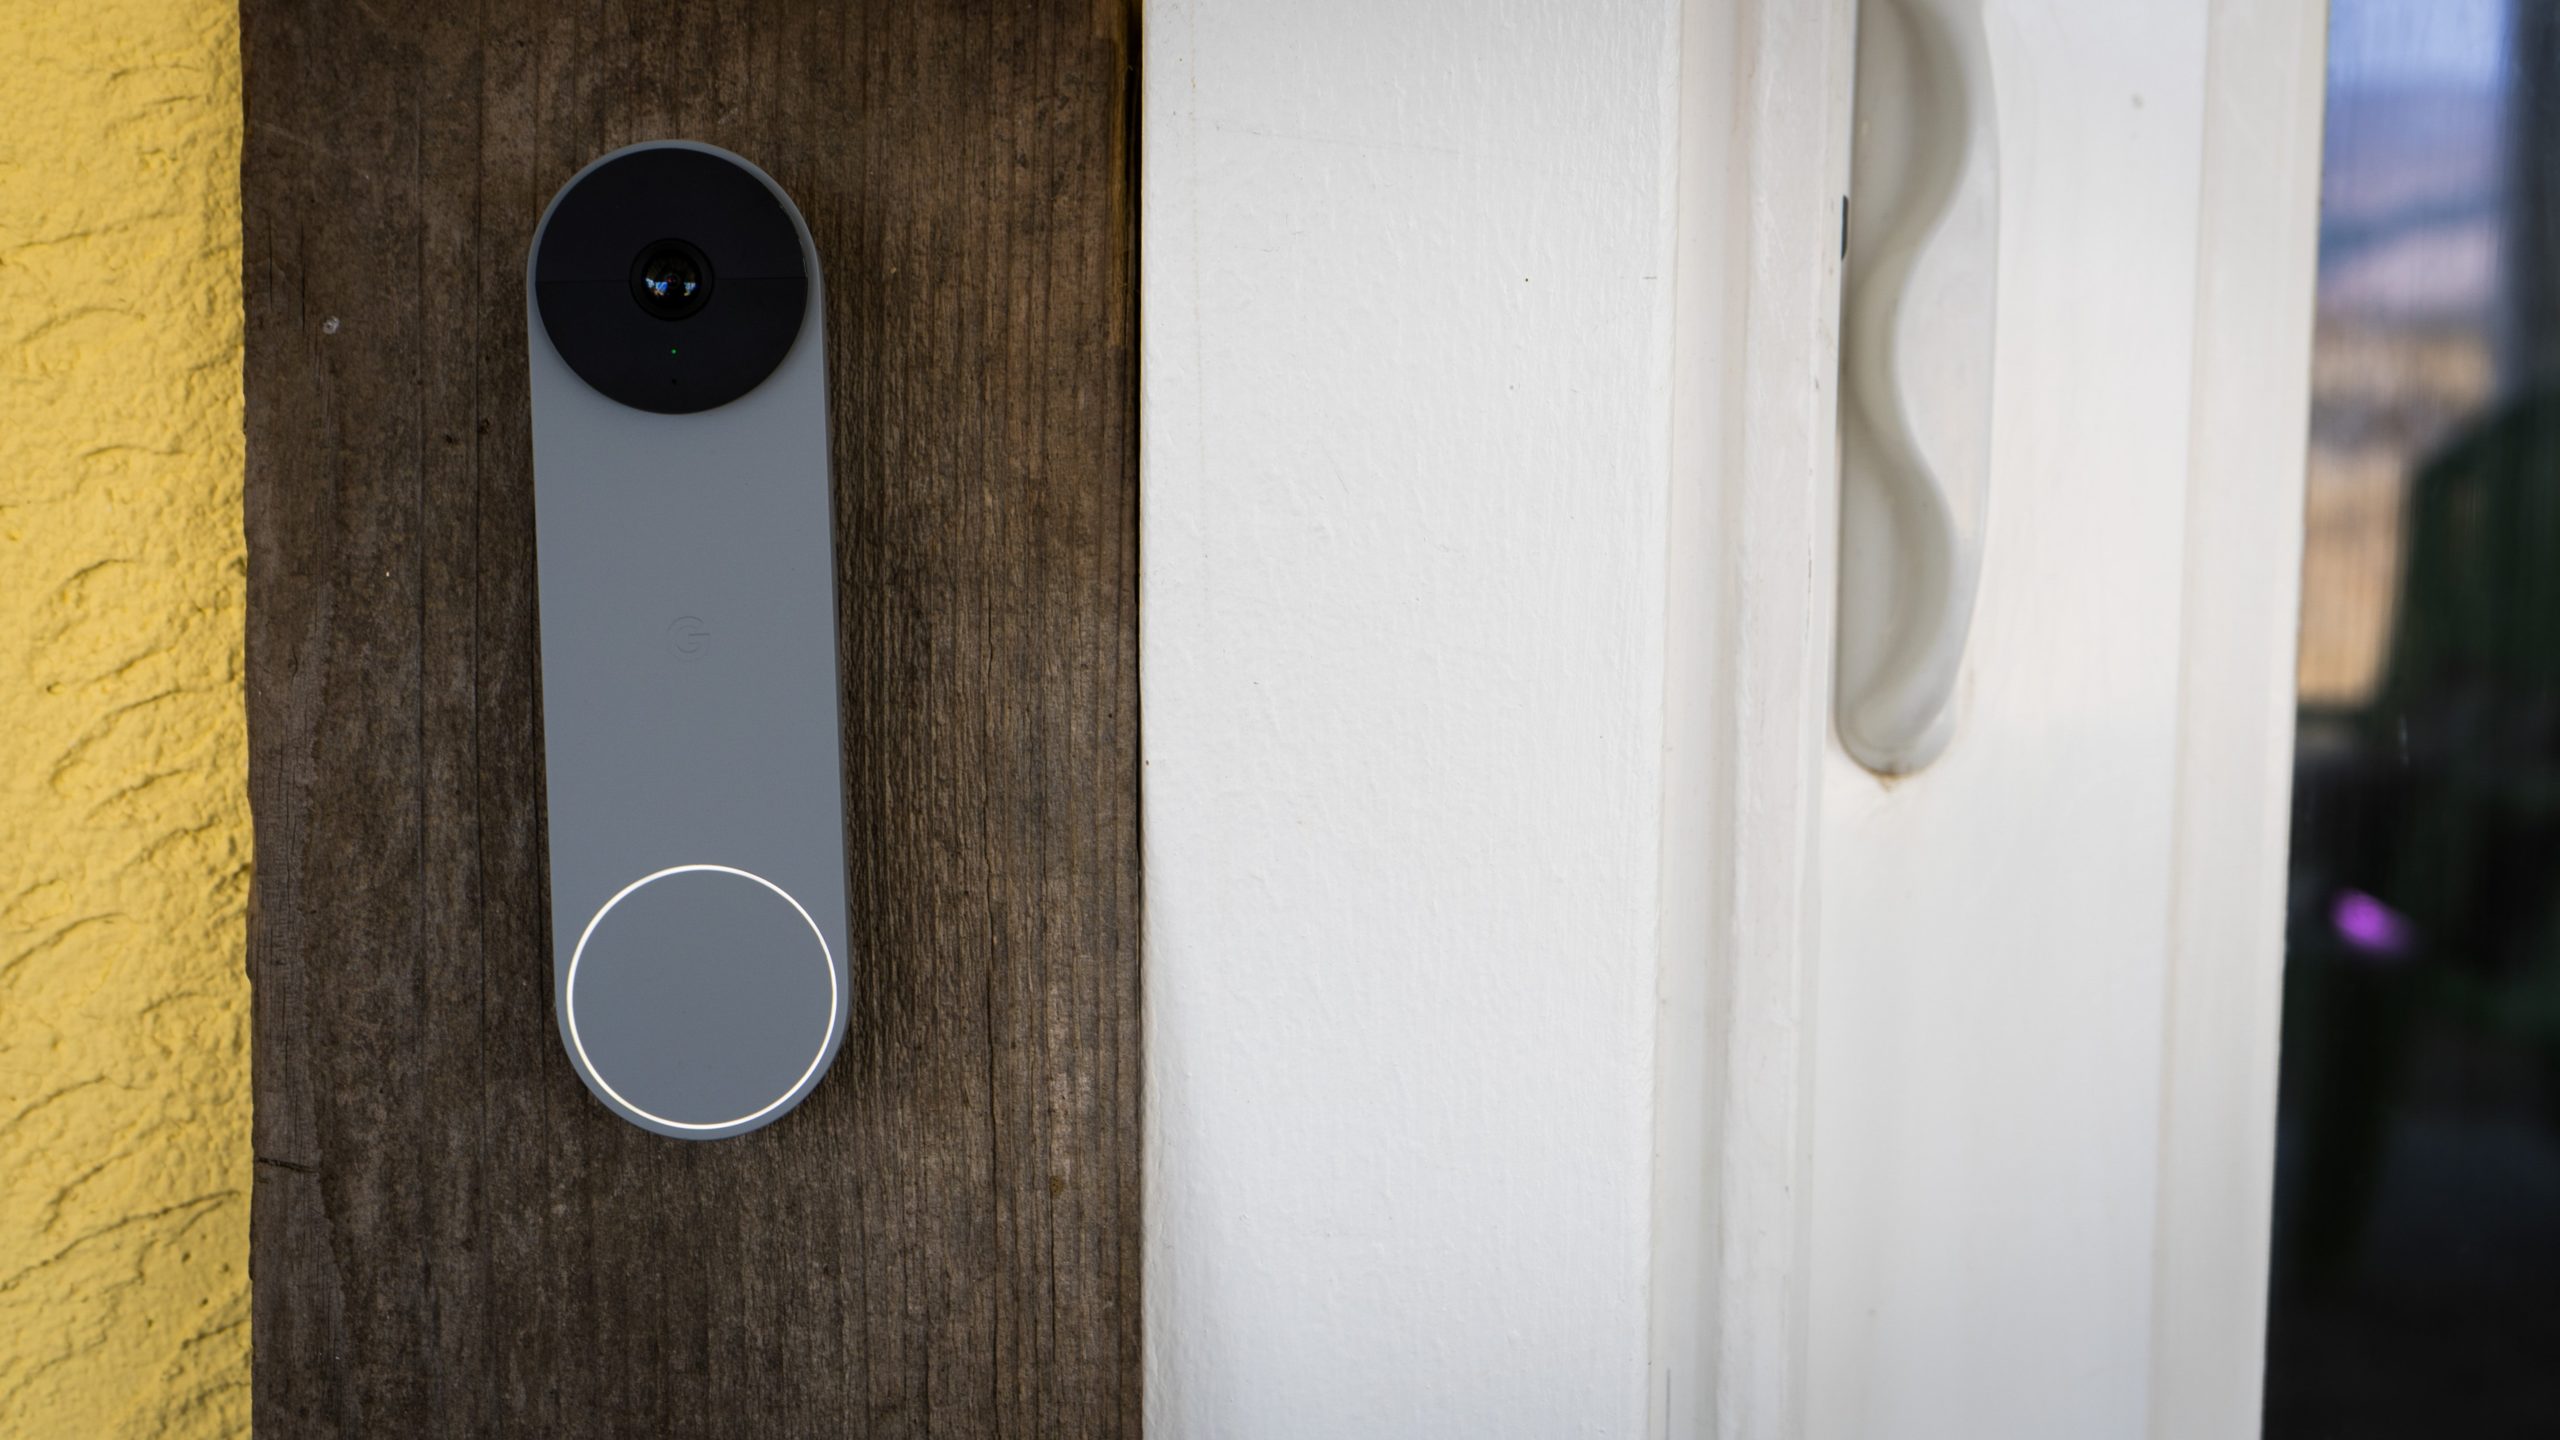 The Nest Doorbell lights up after the button has been pressed.  (Photo: Florence Ion / Gizmodo)